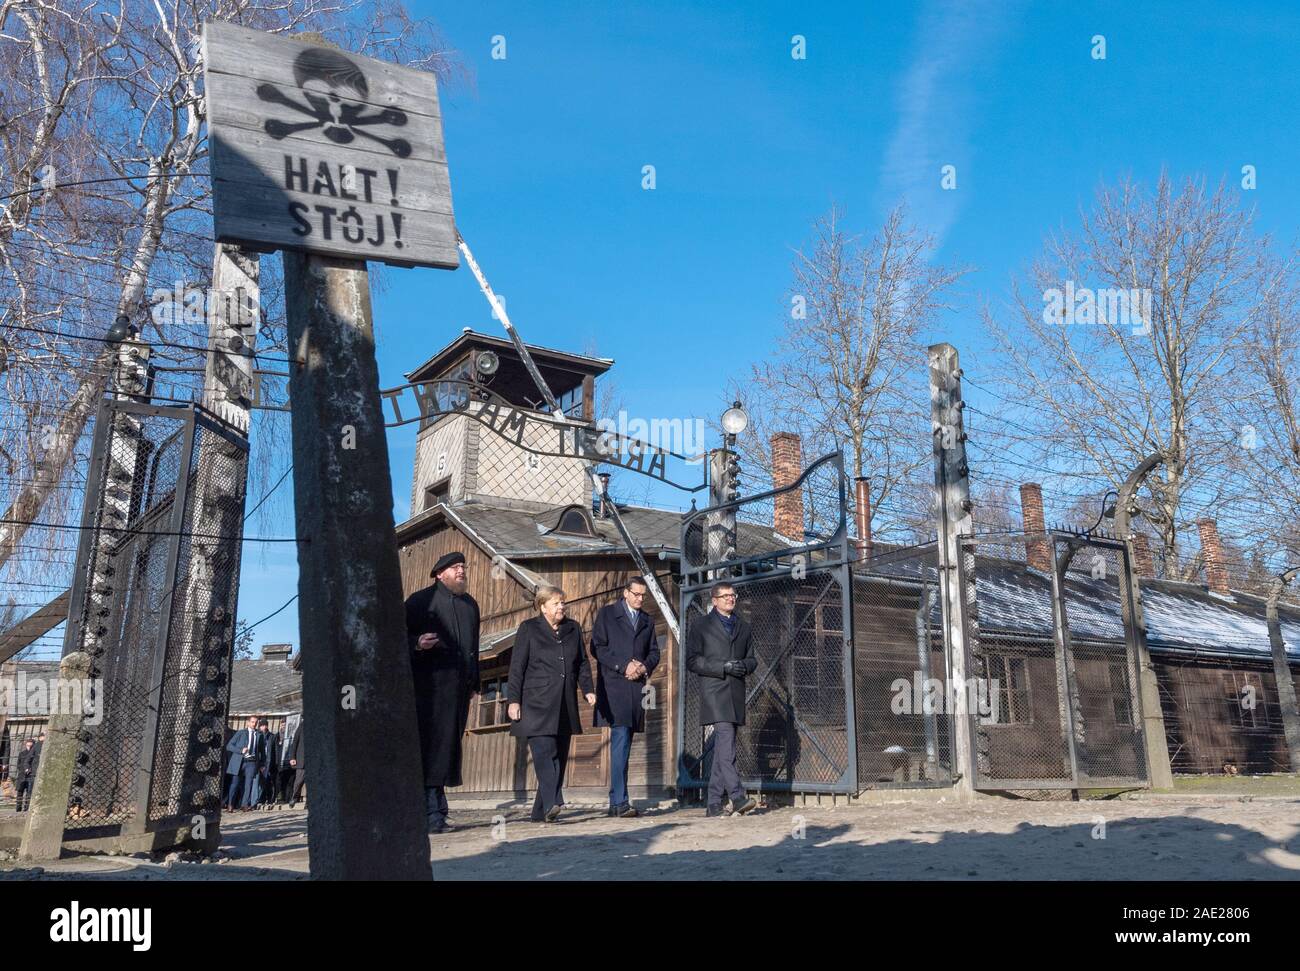 06 December 2019, Poland, Oswiecim: Federal Chancellor Angela Merkel (CDU) visits the former German Auschwitz concentration camp and walks under the entrance gate with the words 'Arbeit macht frei' (Work makes free) together with Polish Prime Minister Mateusz Morawiecki (to the right of Merkel) and Piotr Cywinski (to the left of Merkel), Director of the Auschwitz-Birkenau Memorial and President of the Auschwitz-Birkenau Foundation. Andrzej Kacorzyk, Deputy Director of the Auschwitz-Birkenau Museum, goes to the far right. Merkel accepted an invitation from the Auschwitz-Birkenau Foundation, whi Stock Photo